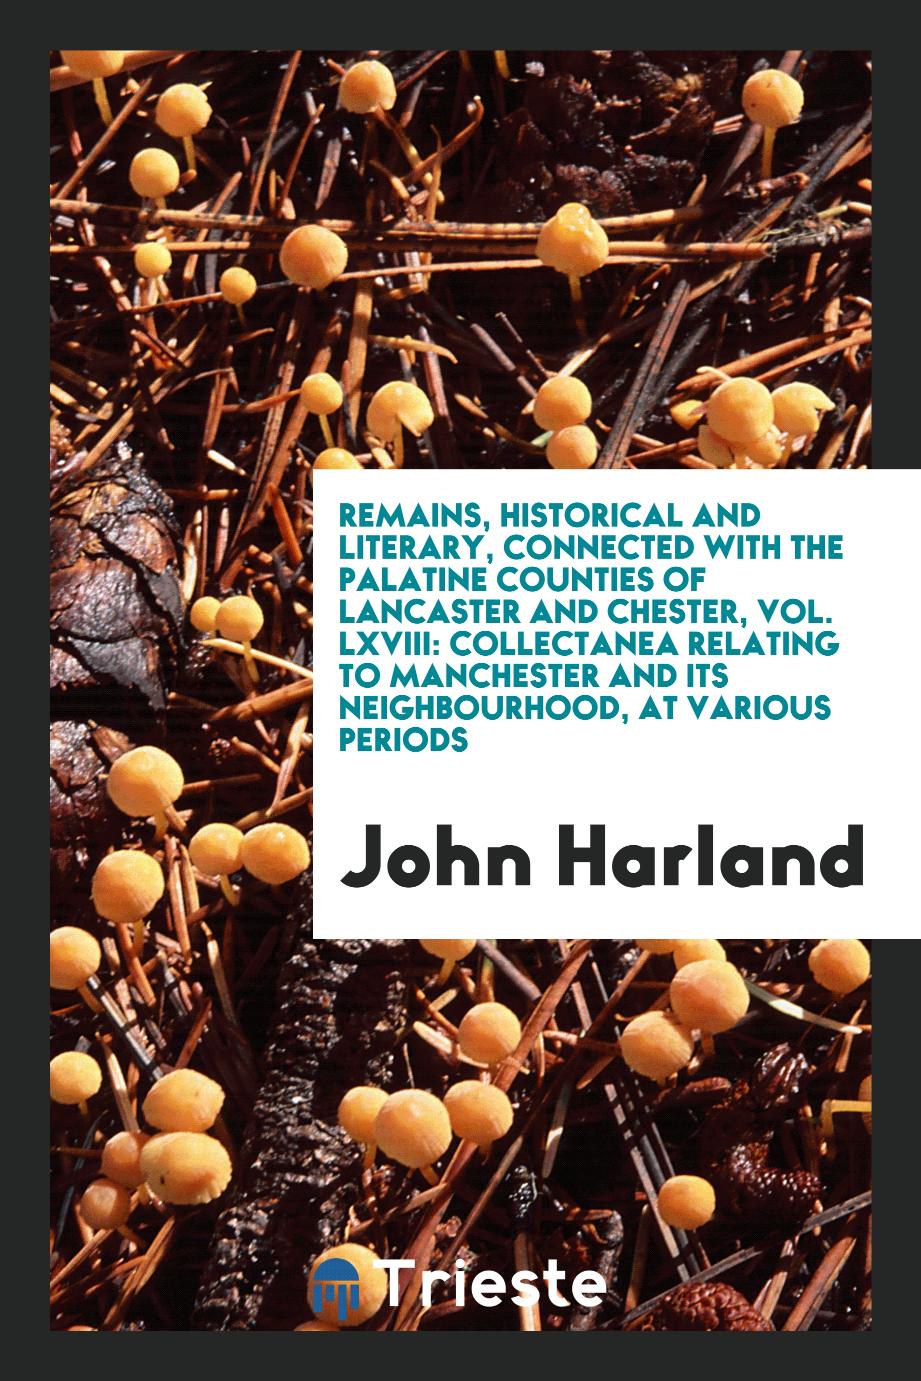 Remains, Historical and Literary, Connected with the Palatine Counties of Lancaster and Chester, Vol. LXVIII: Collectanea Relating to Manchester and Its Neighbourhood, at Various Periods